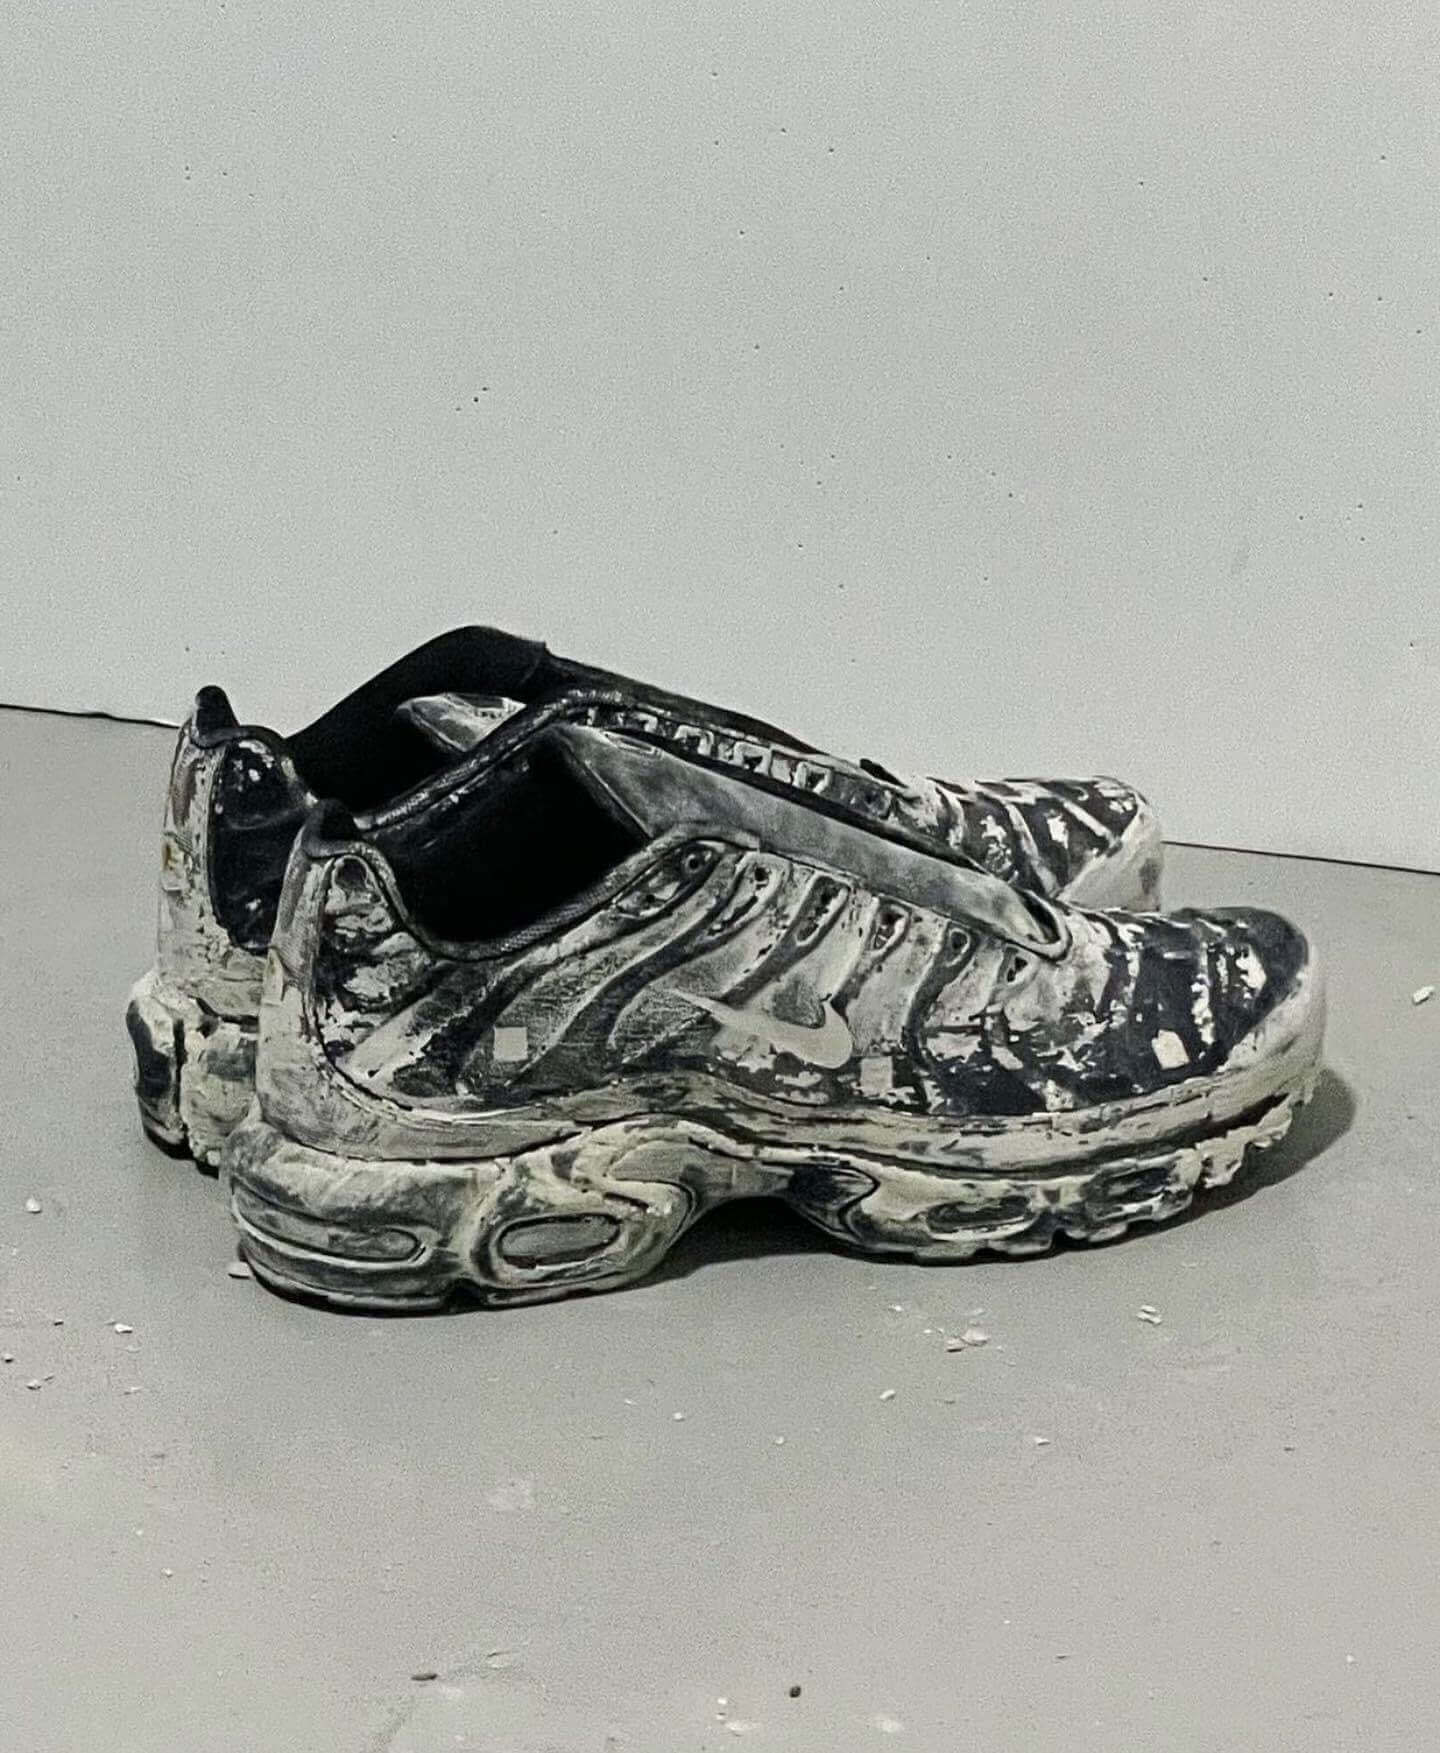 A-COLD-WALL* x Nike Reveal a New TN98 Collaboration